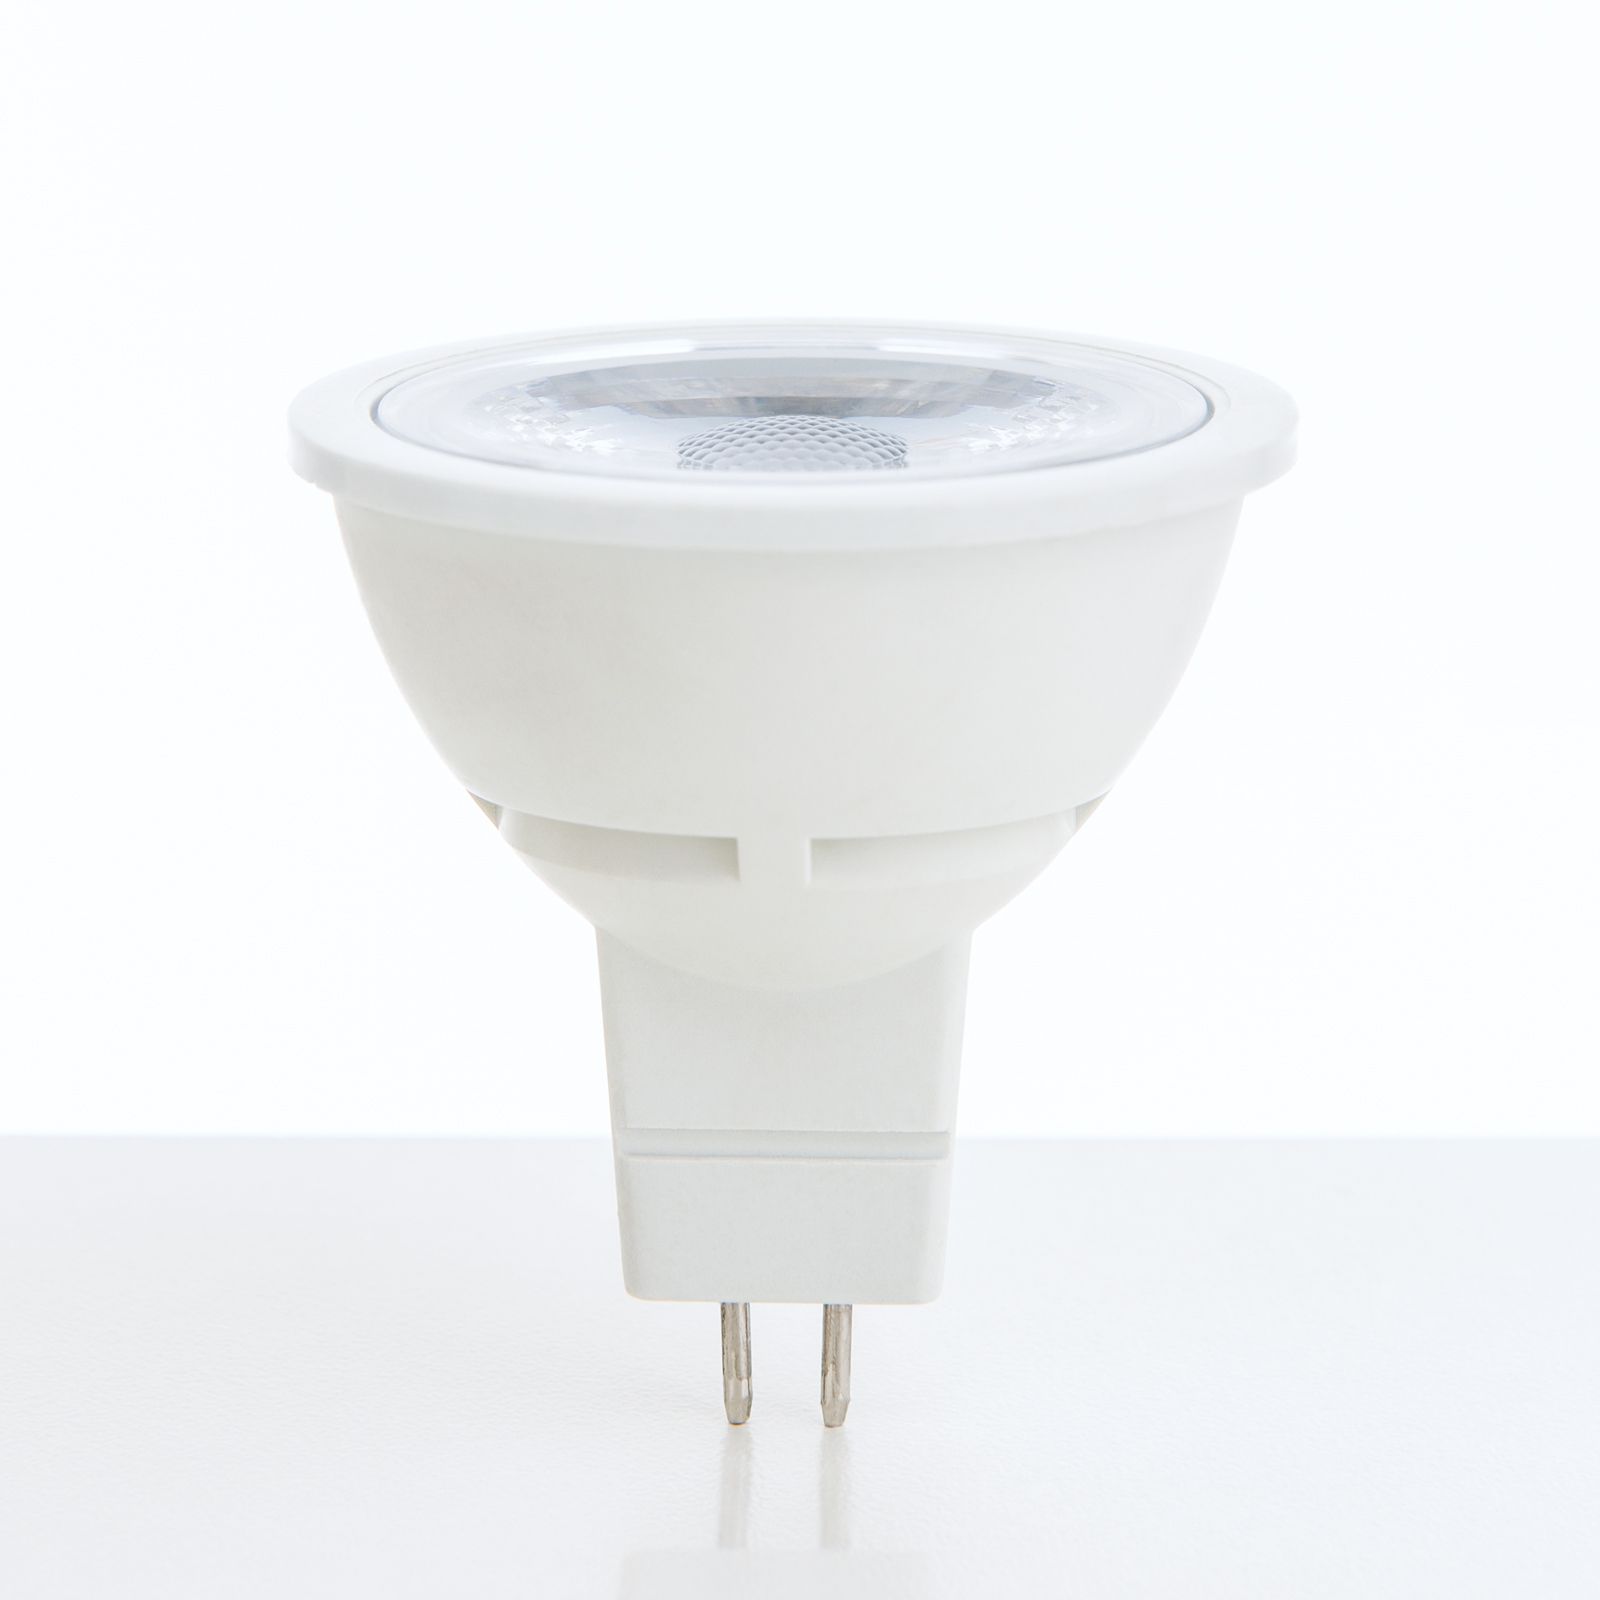 LED 12v MR16 6w Low Voltage Reflector Lamp - Driver Required